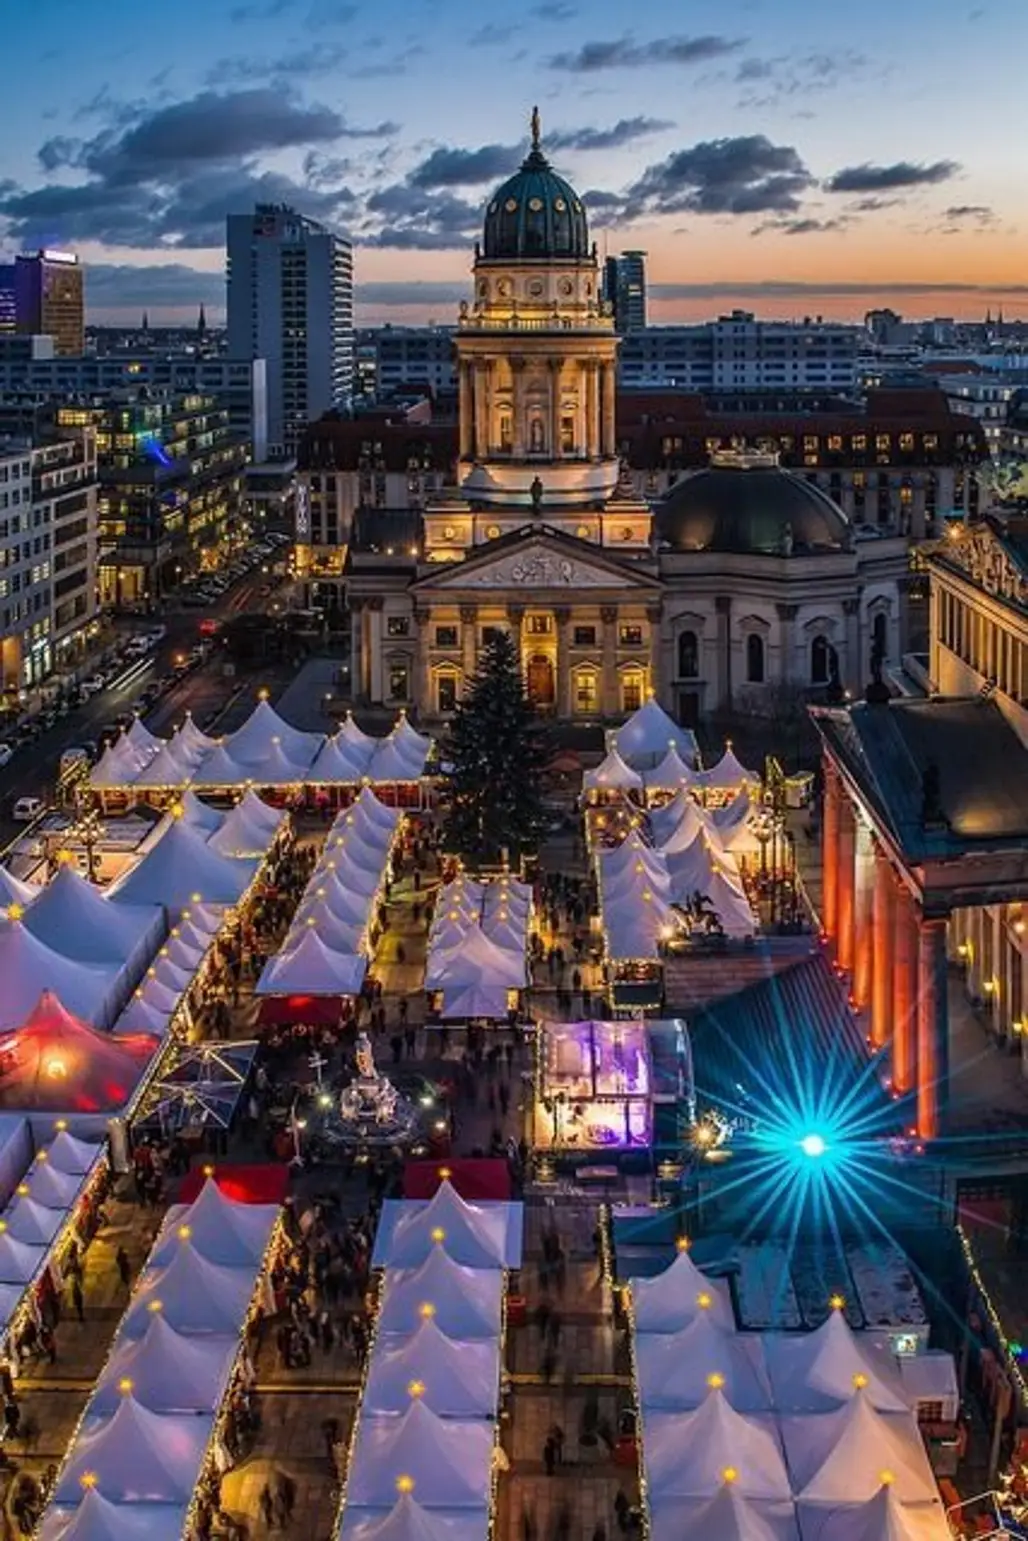 Buy Gifts at the Christmas Market